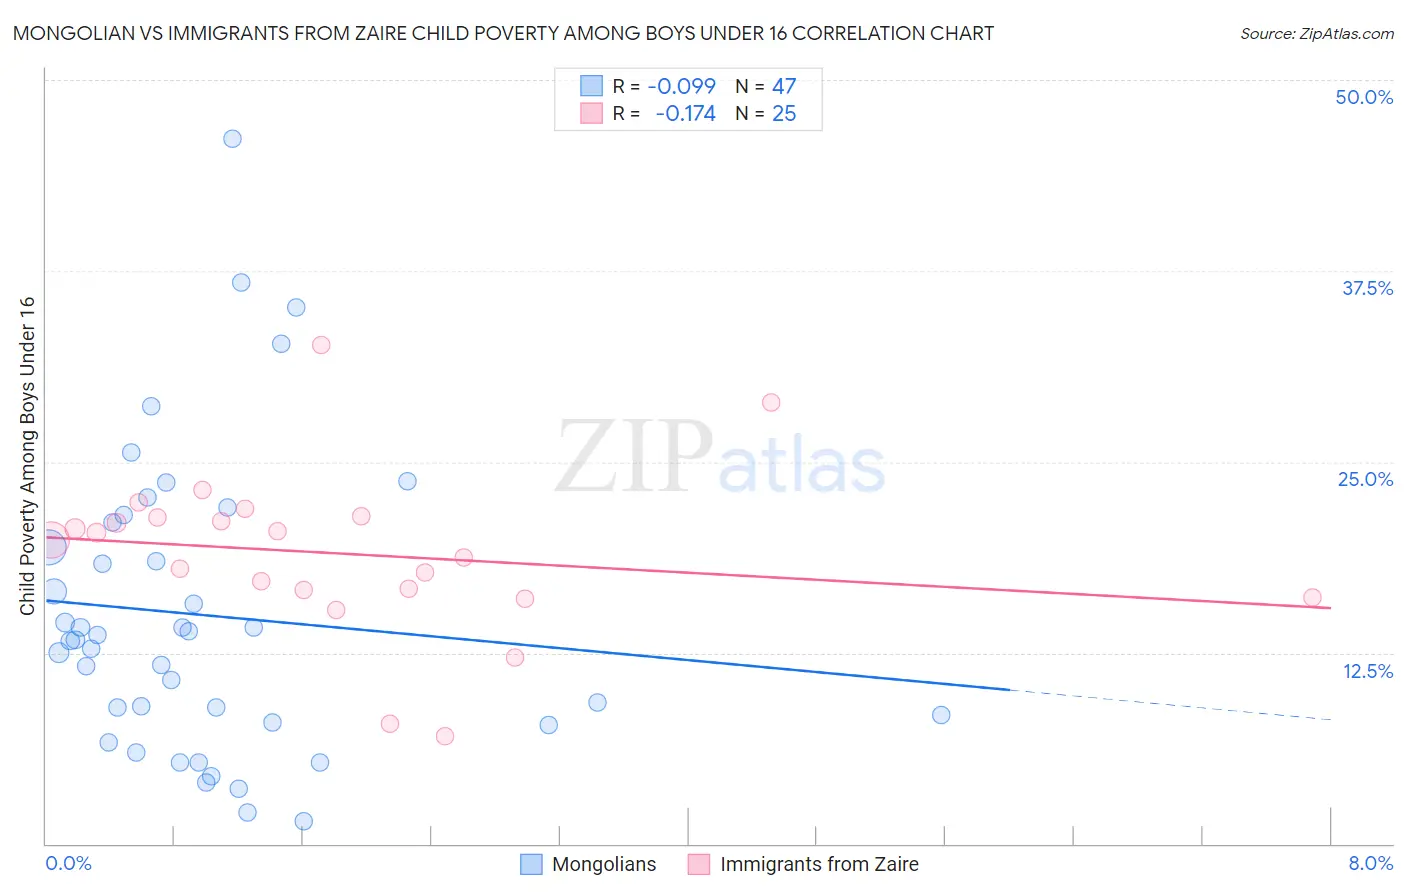 Mongolian vs Immigrants from Zaire Child Poverty Among Boys Under 16